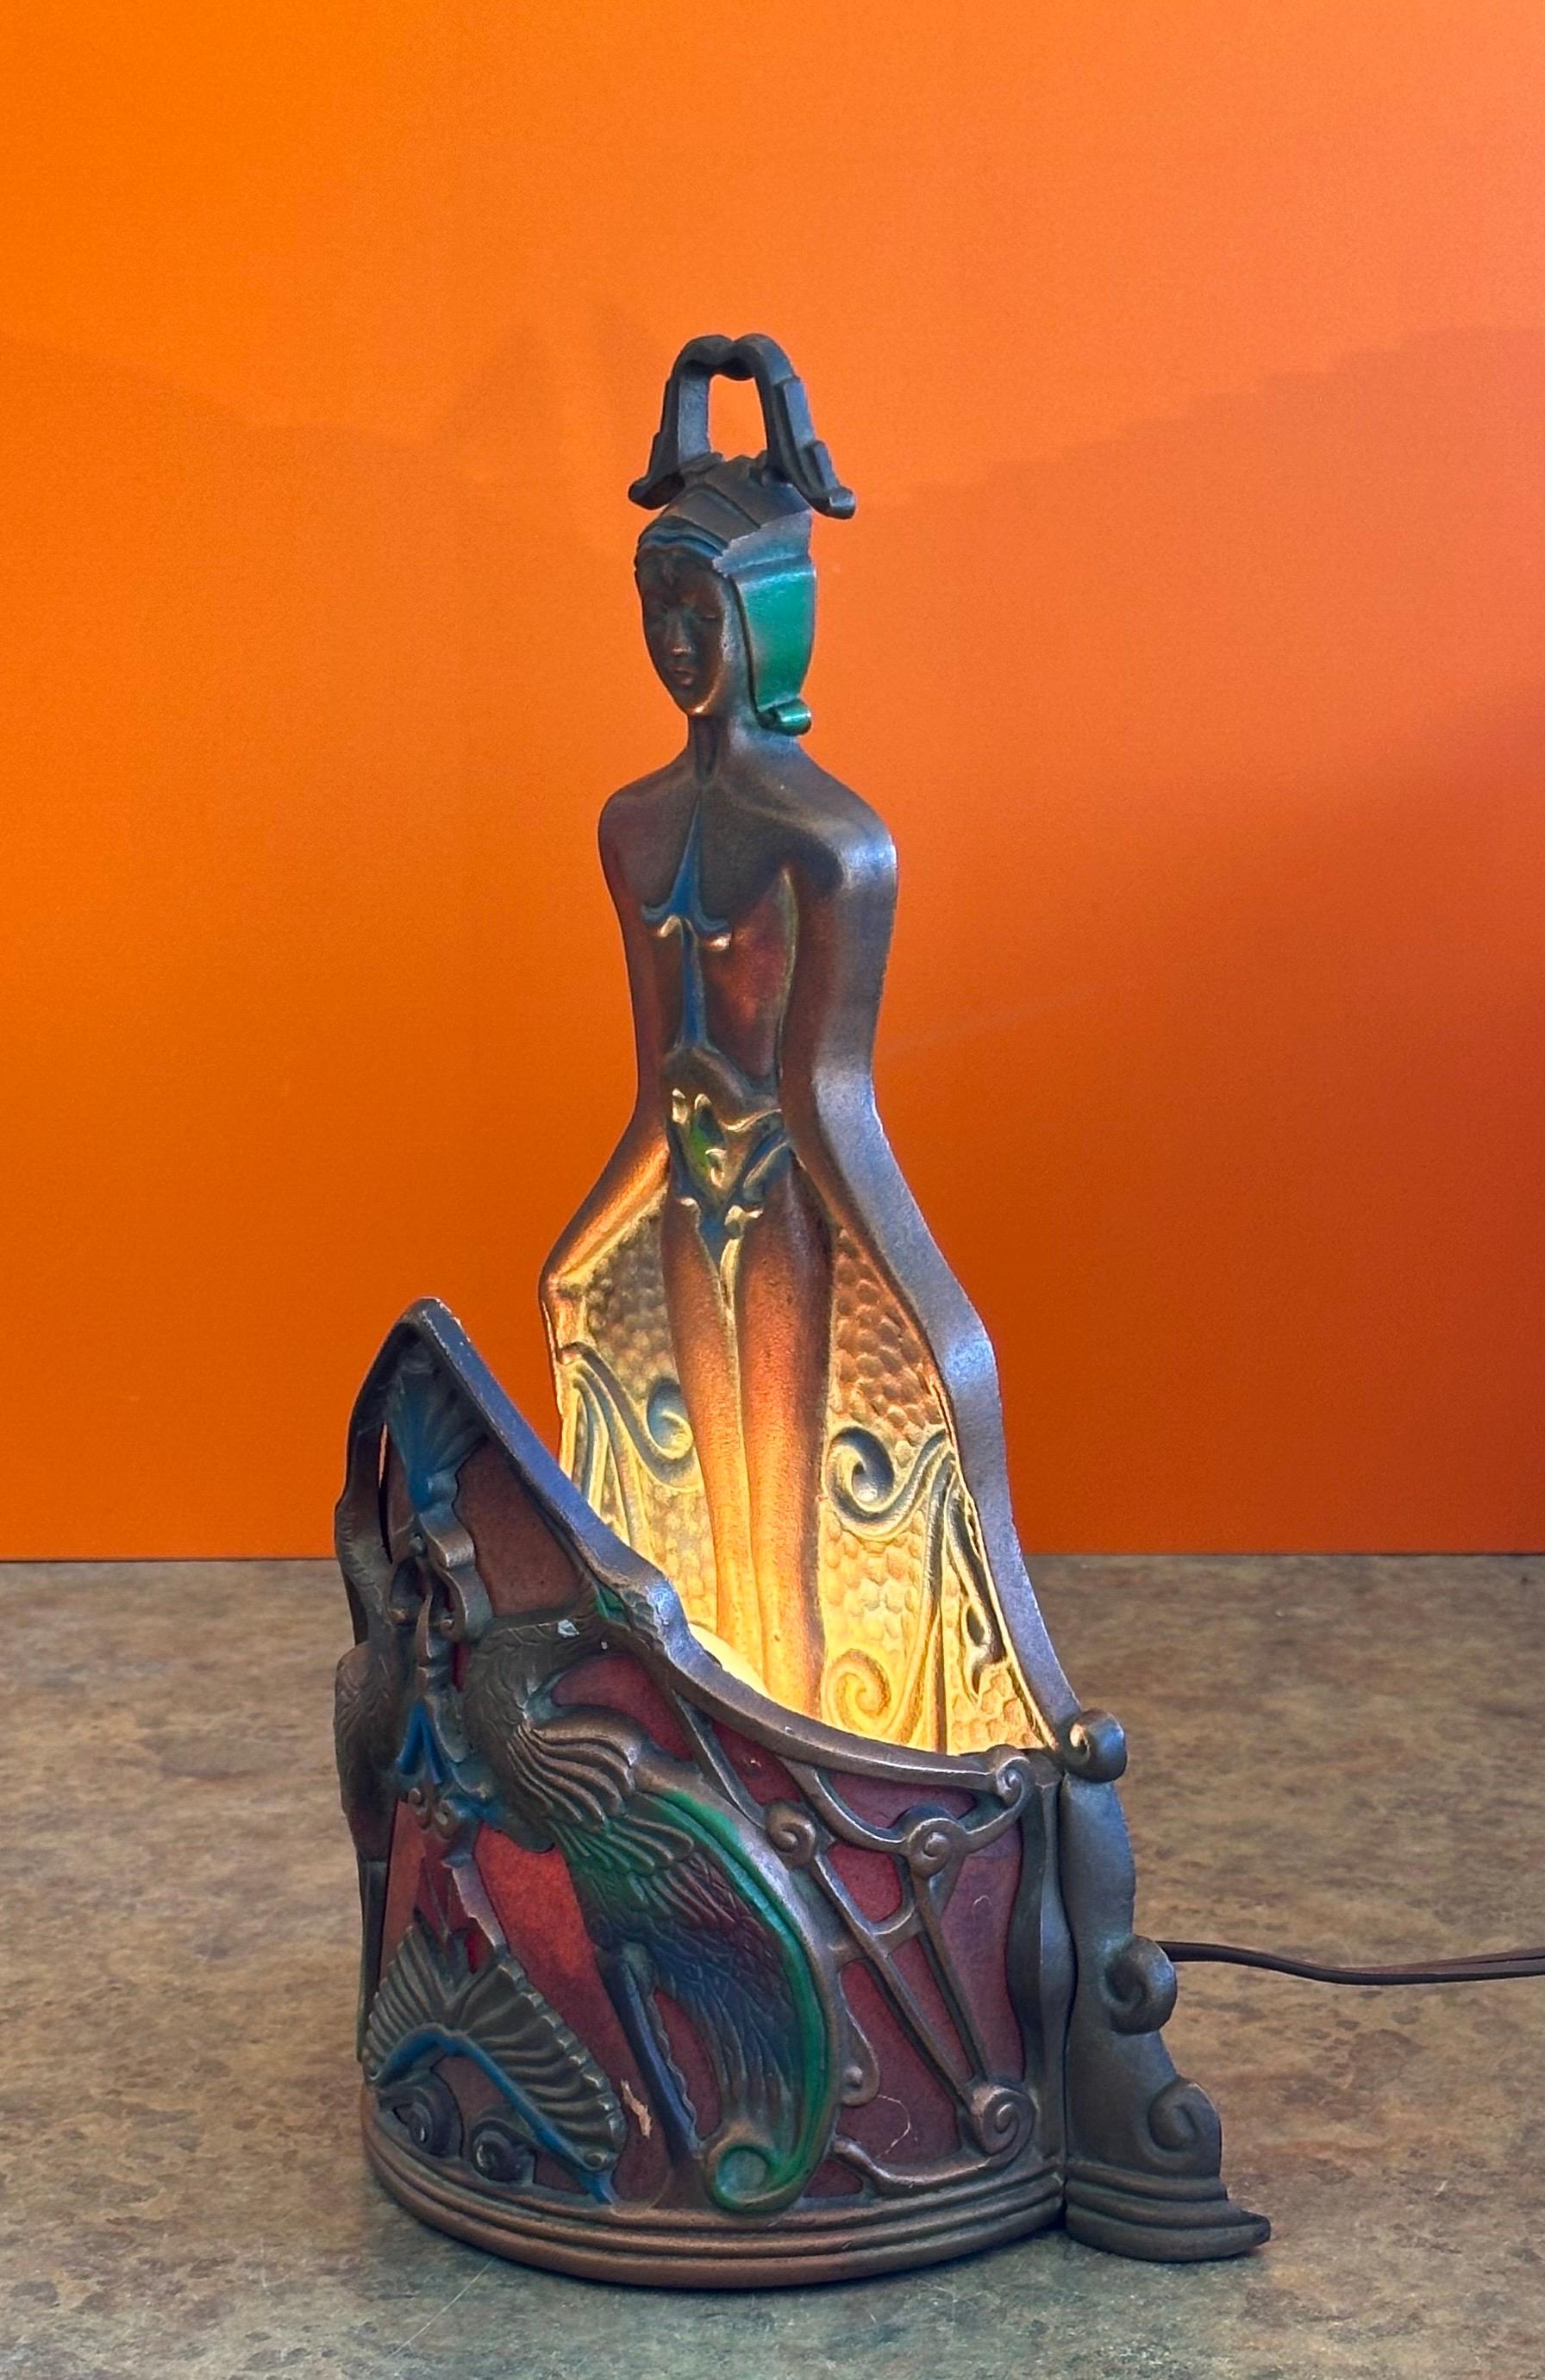 Antique Art Deco Egyptian Revival Style Bronze Table Lamp by Reiser Lamp Co. For Sale 2